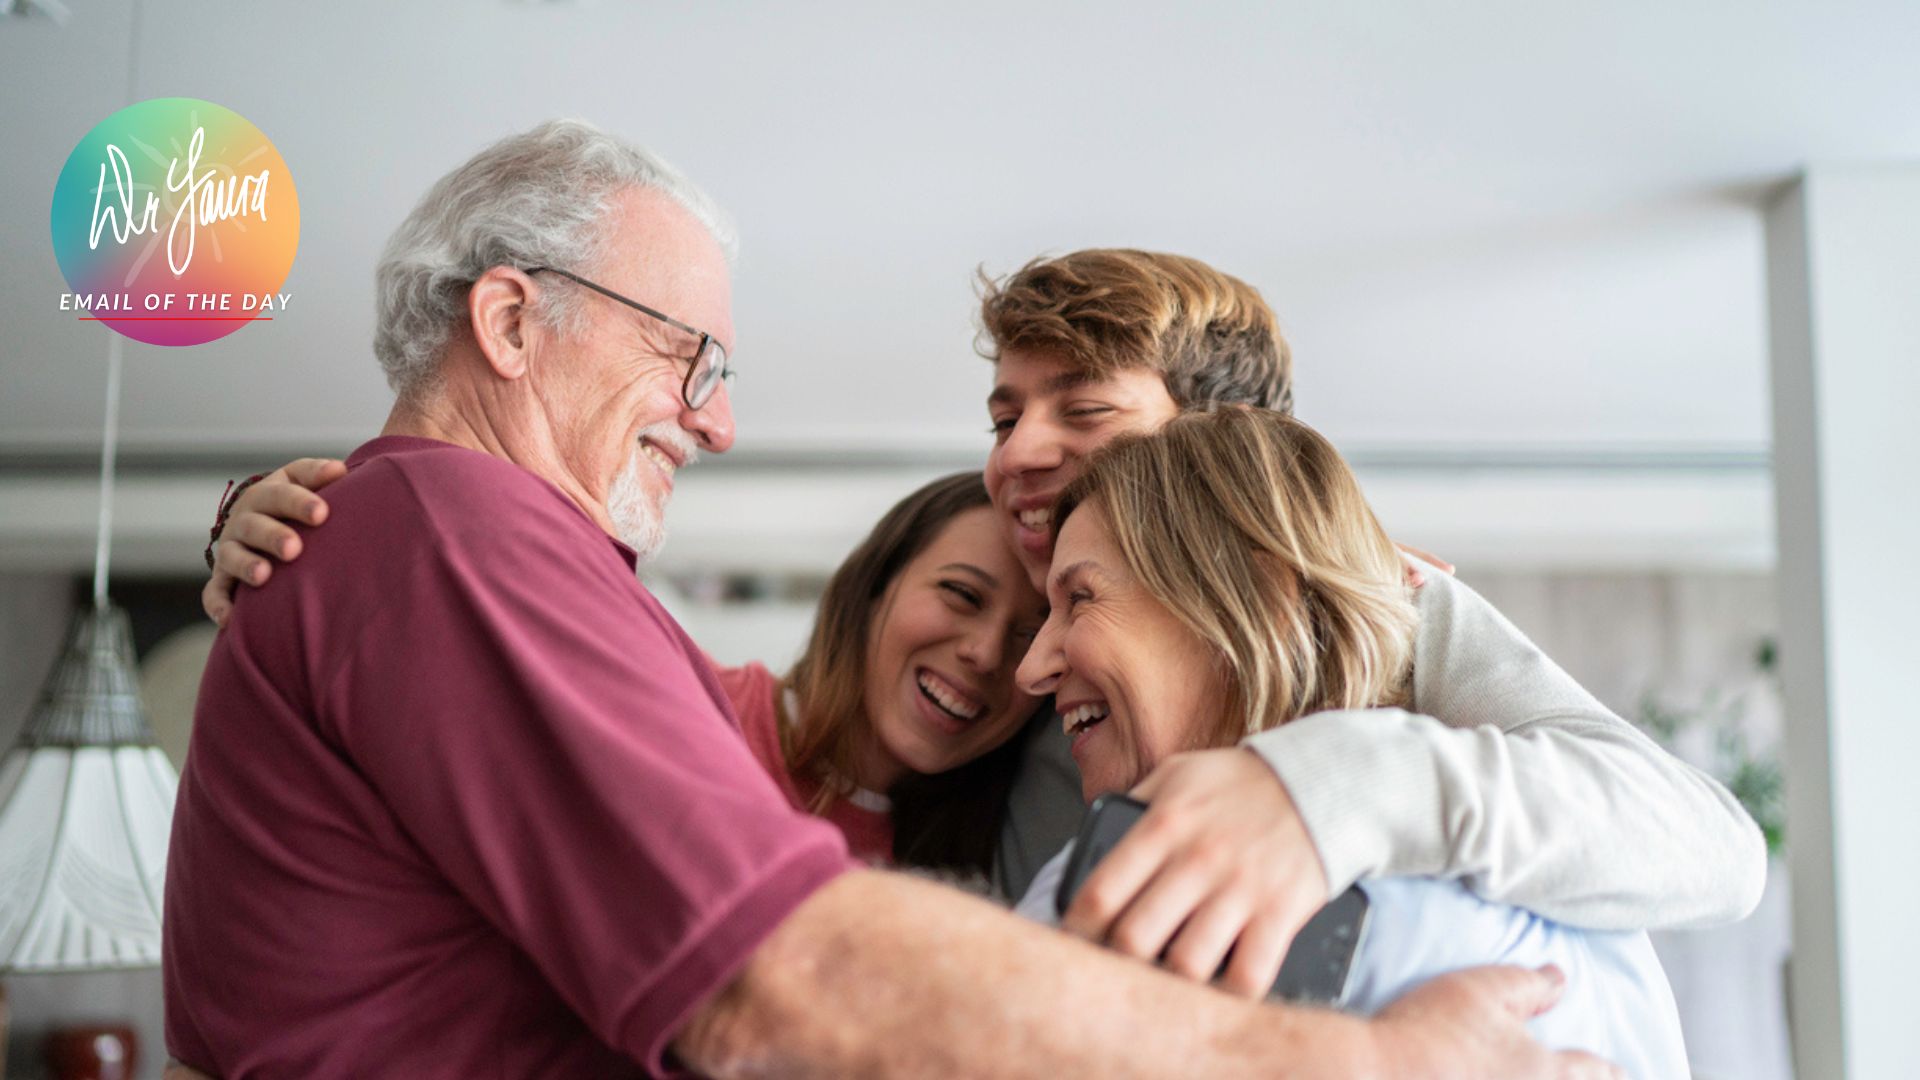 Older man embraces an older woman, male teen and female teen